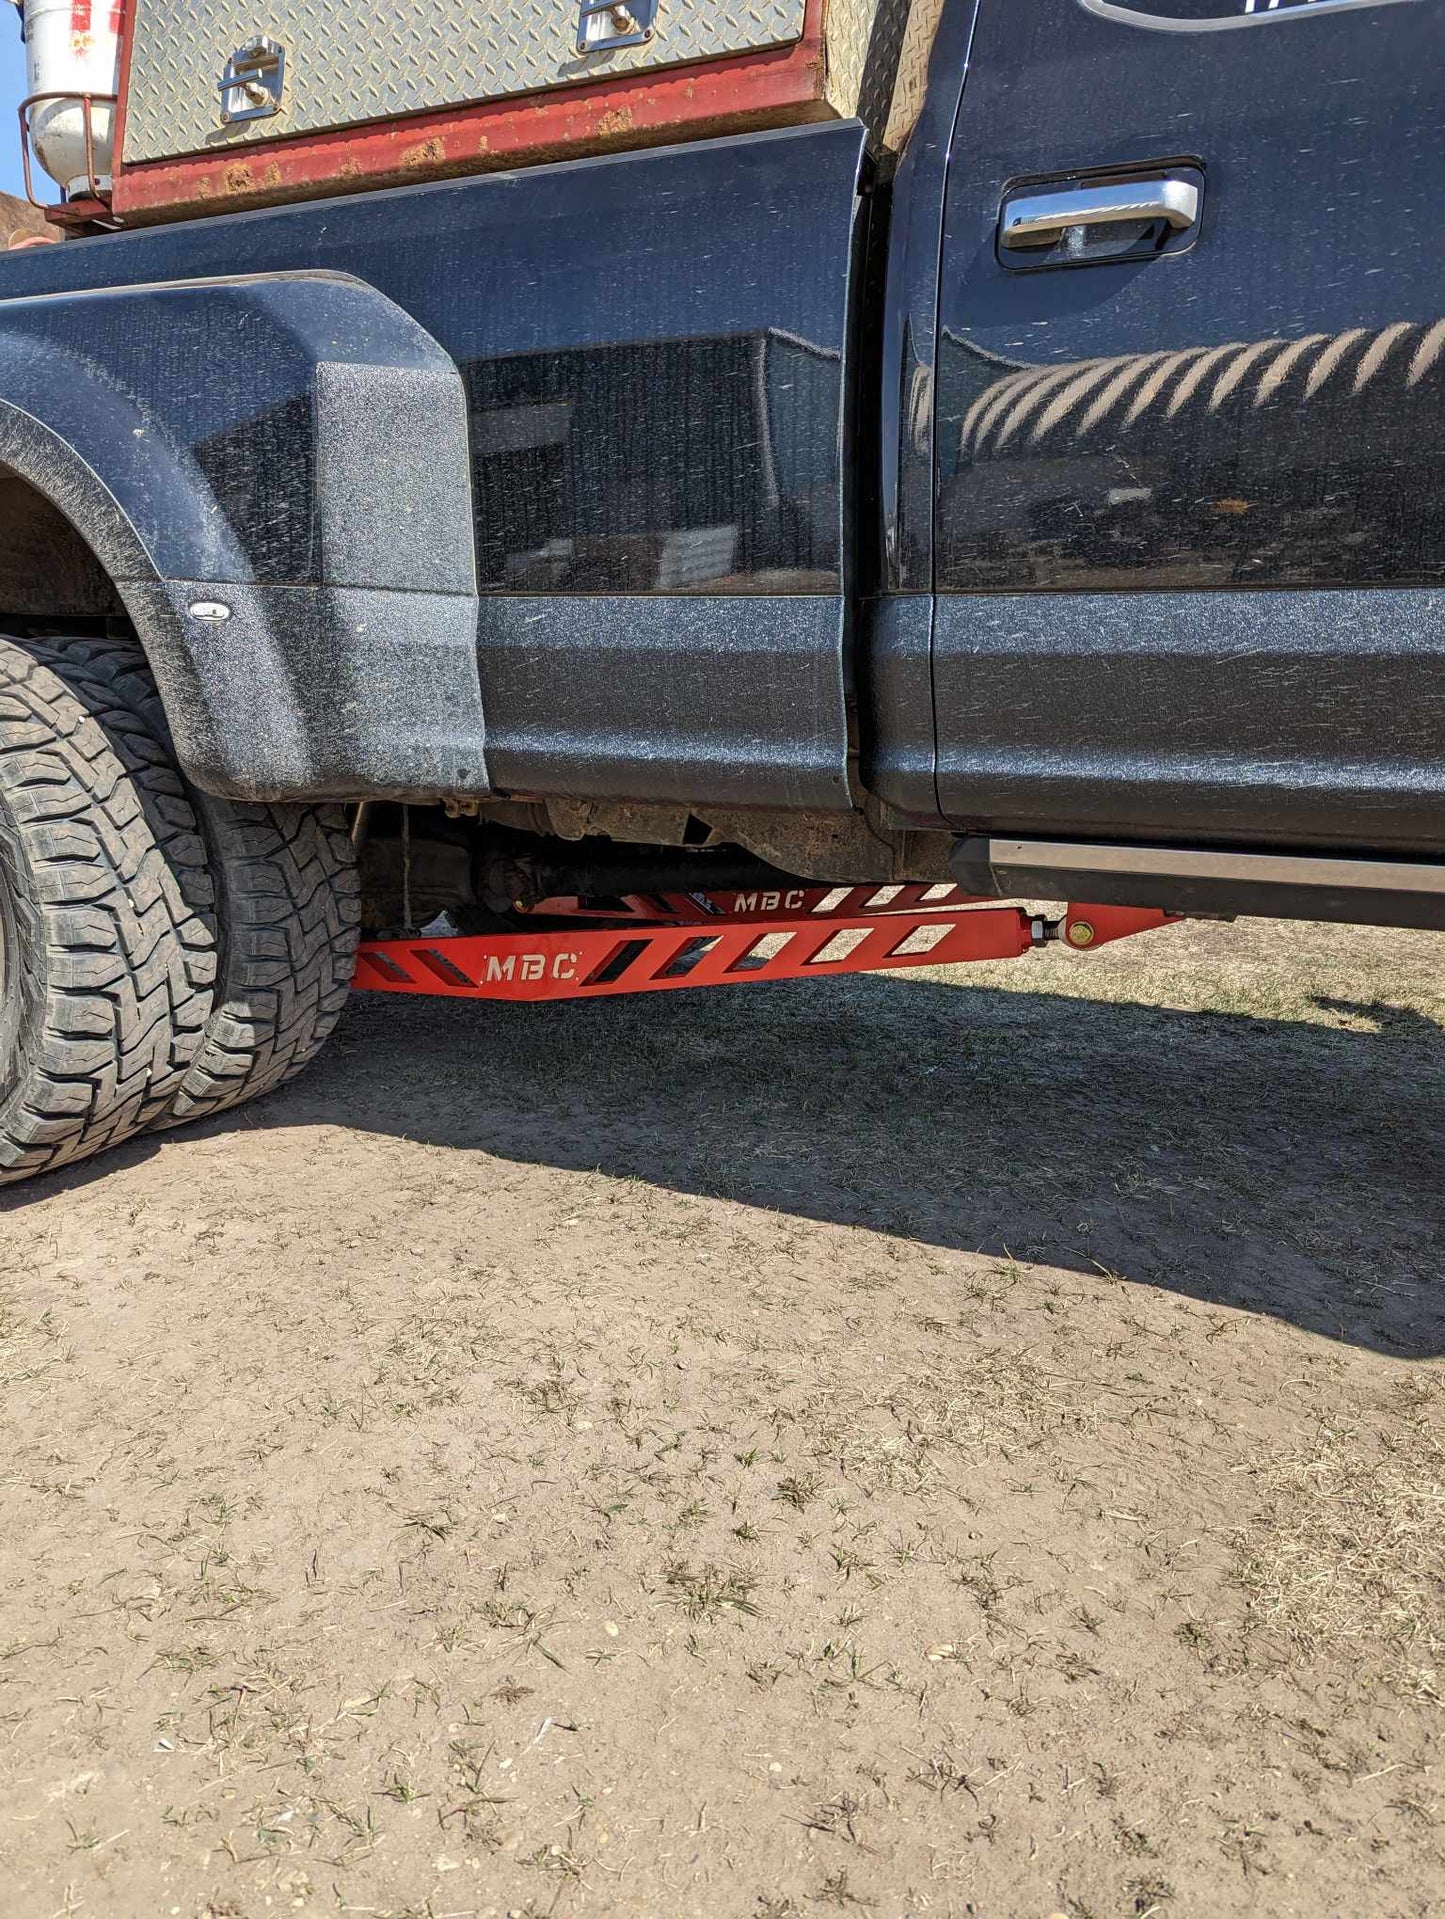 Box style traction bars